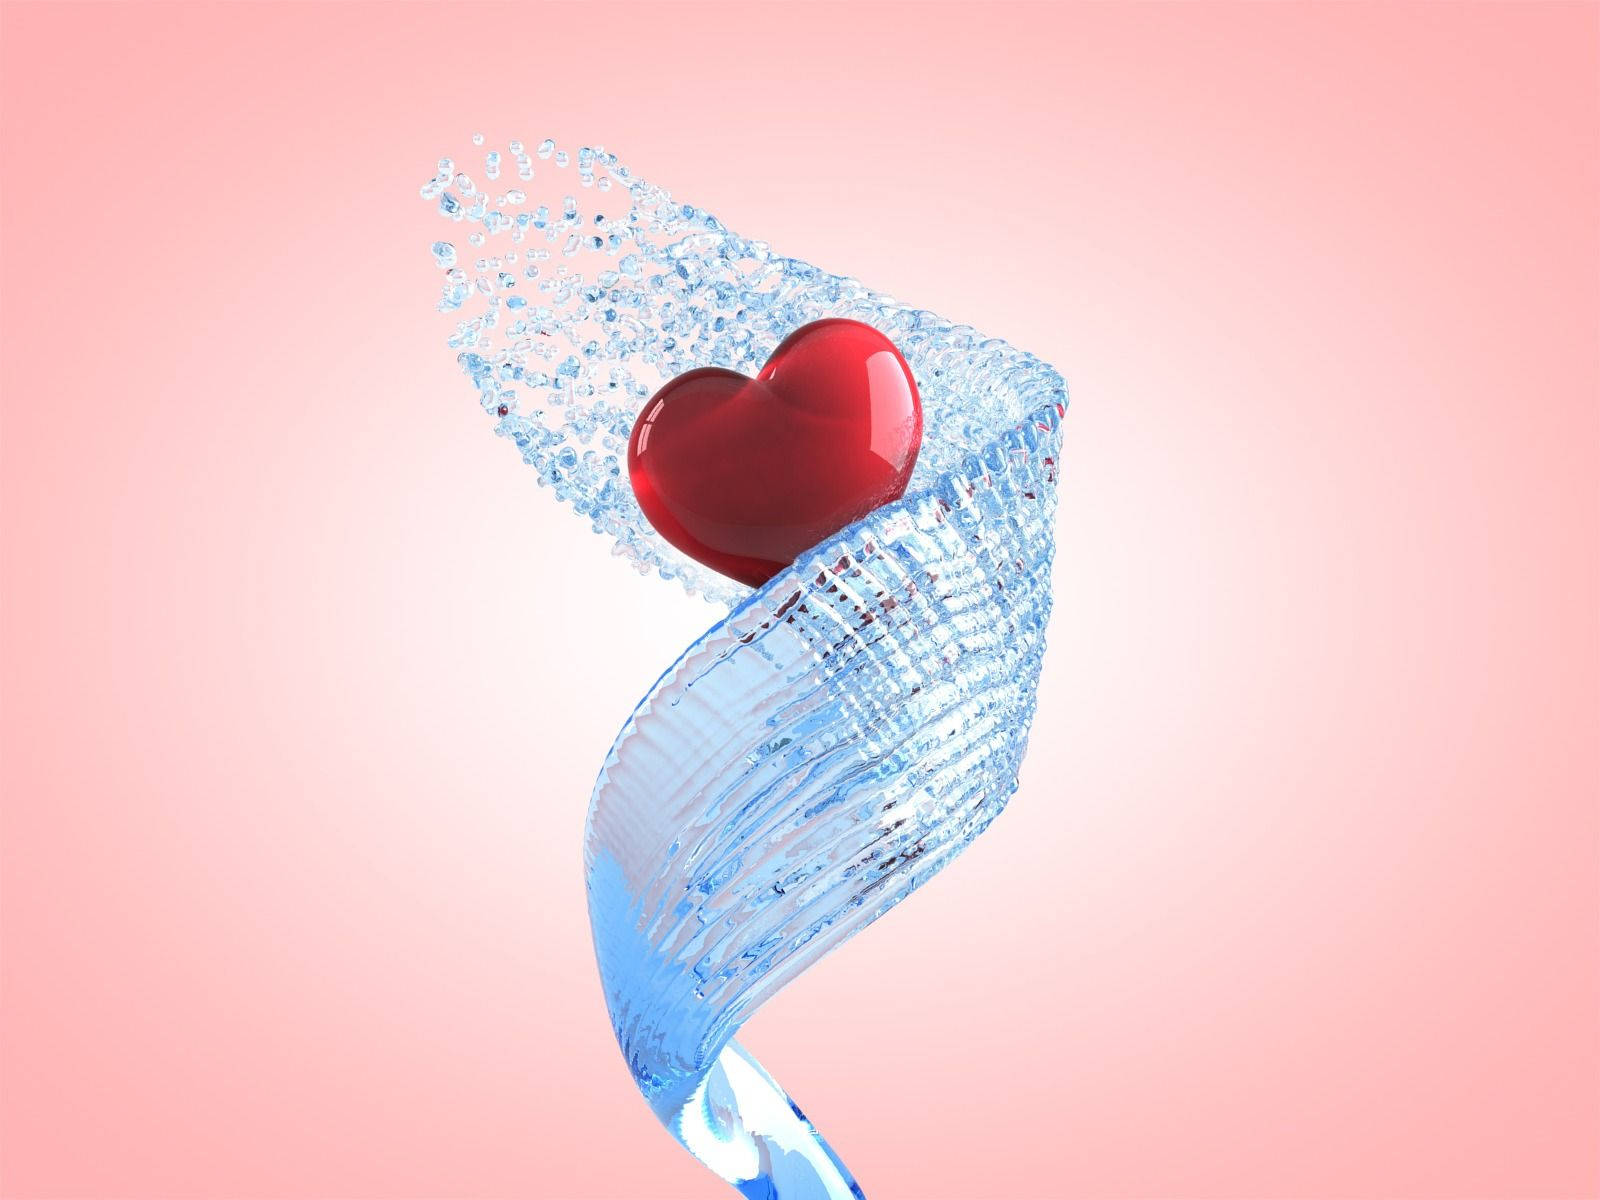 Red Heart in a Pool of Water Wallpaper